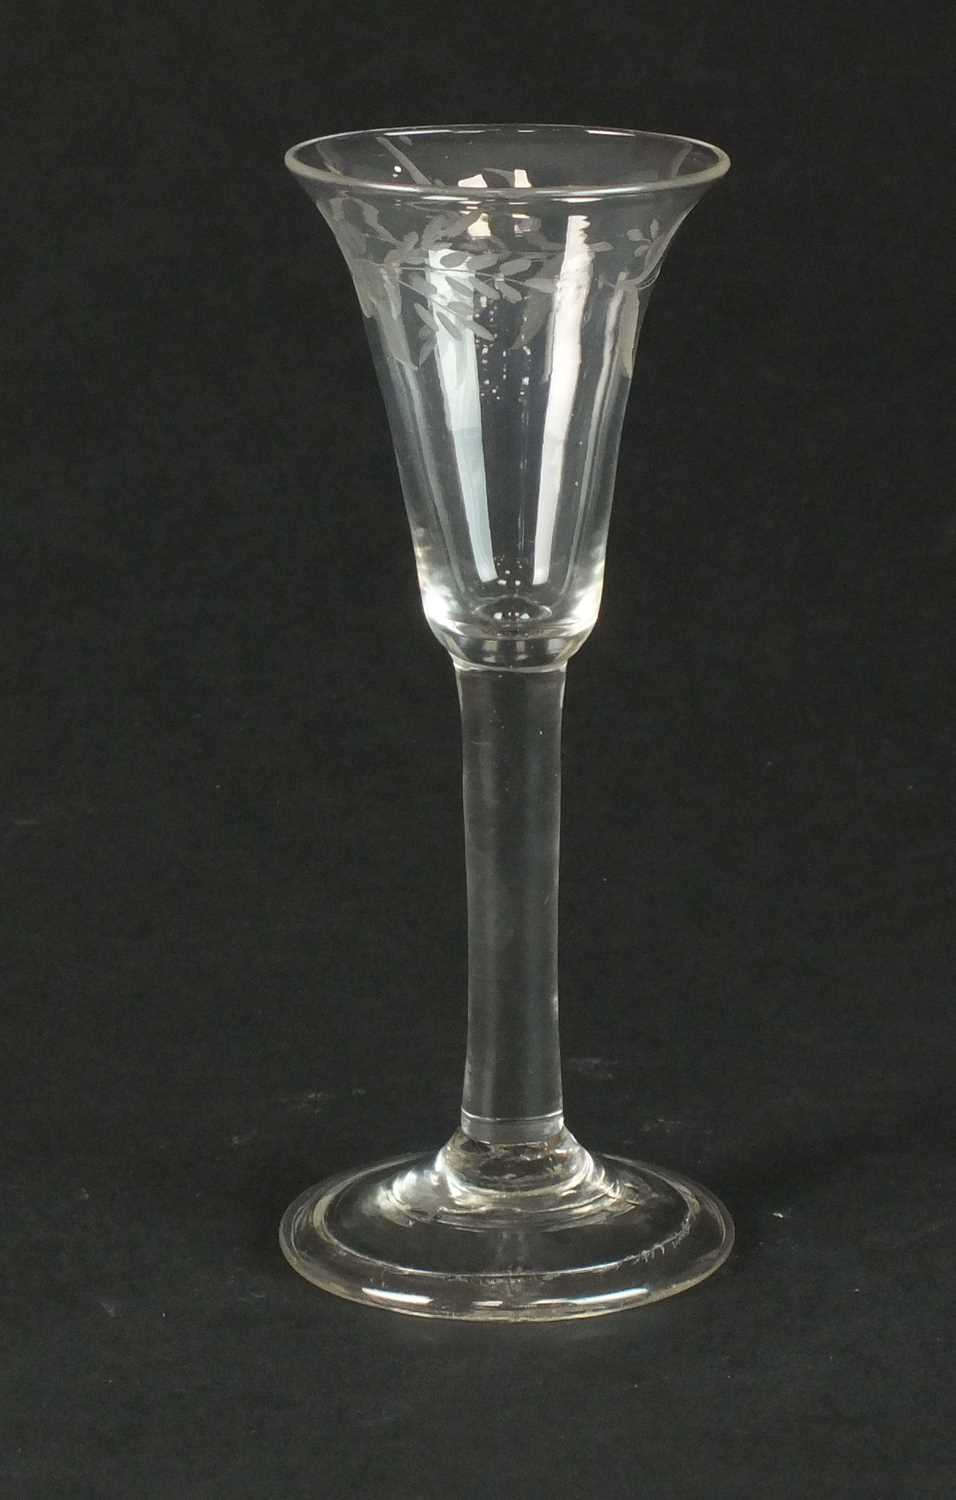 A mid-18th century wine glass